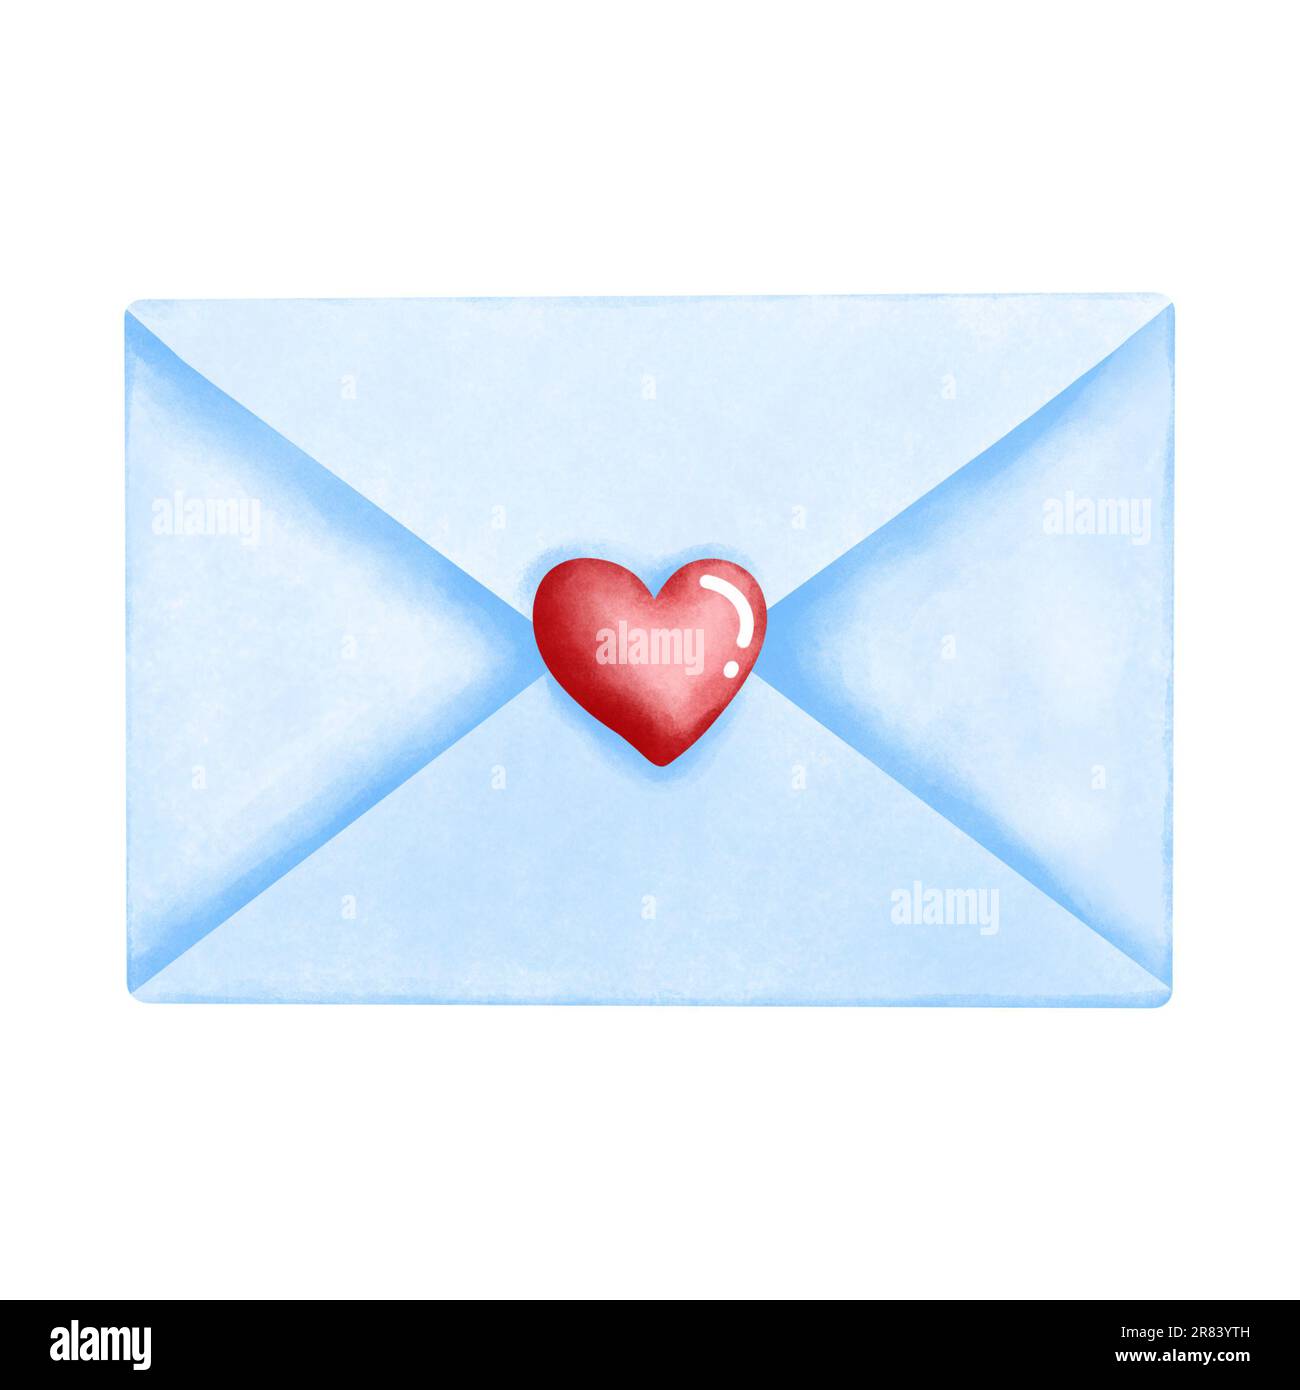 Watercolor blue envelope with red heart illustration isolated on white background. Love letter for Mothers day,Fathers day,Birthday,Valentines day. Stock Photo